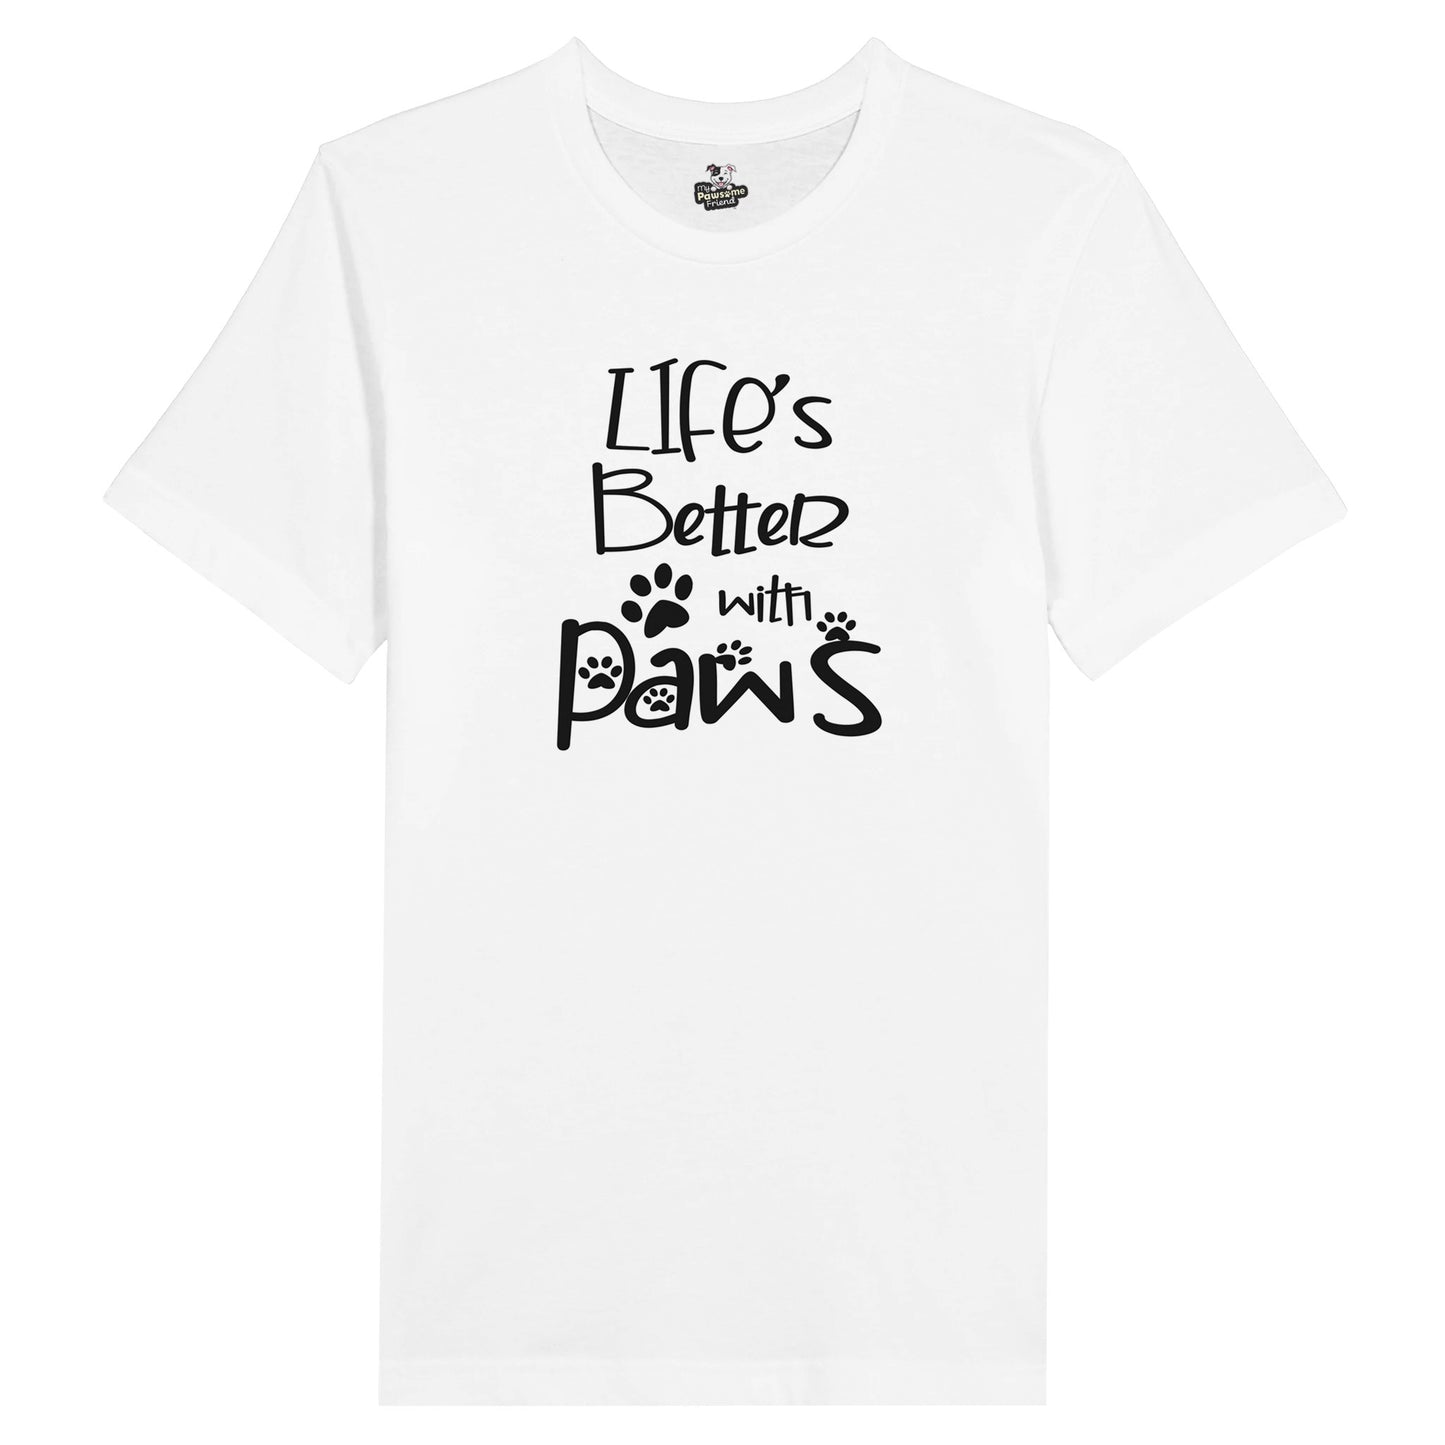 A white t shirt with the design: "Life's better with paws"